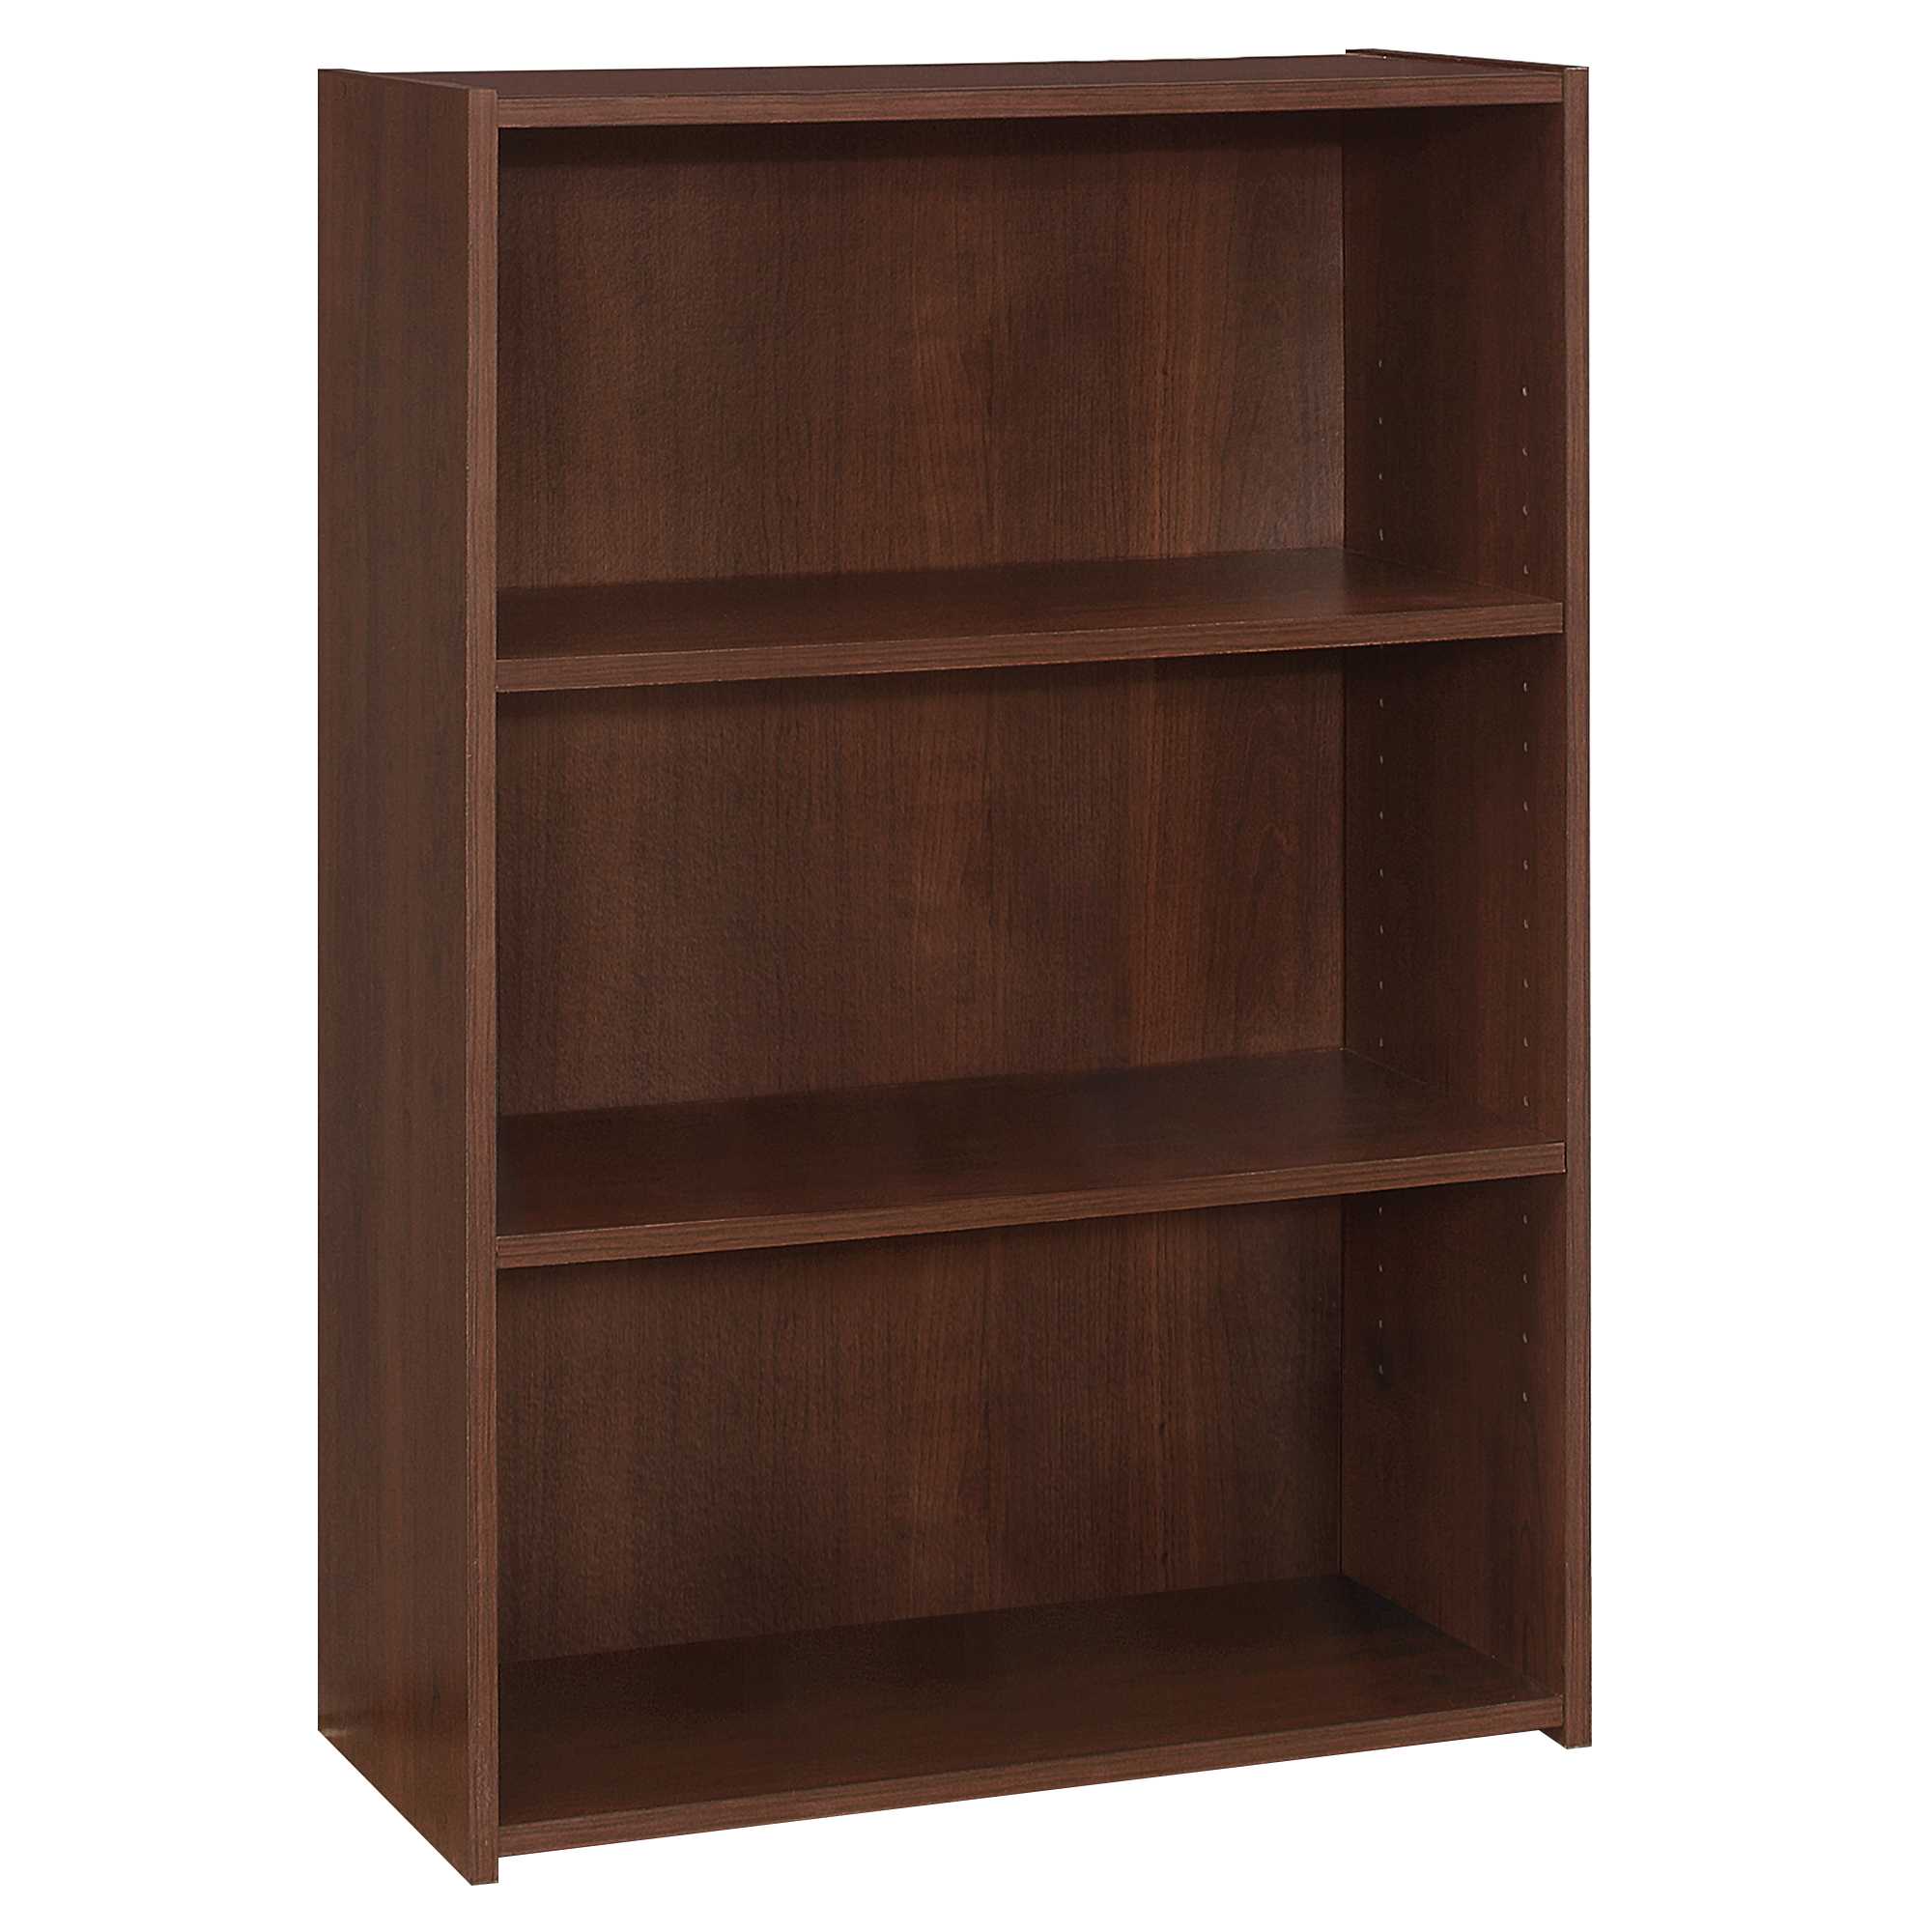 Office Elephant OE05-R1090WH Standard Bookcase 1090mm high with Two Adjustable shelveswith Two Adjustable Shelves in White 